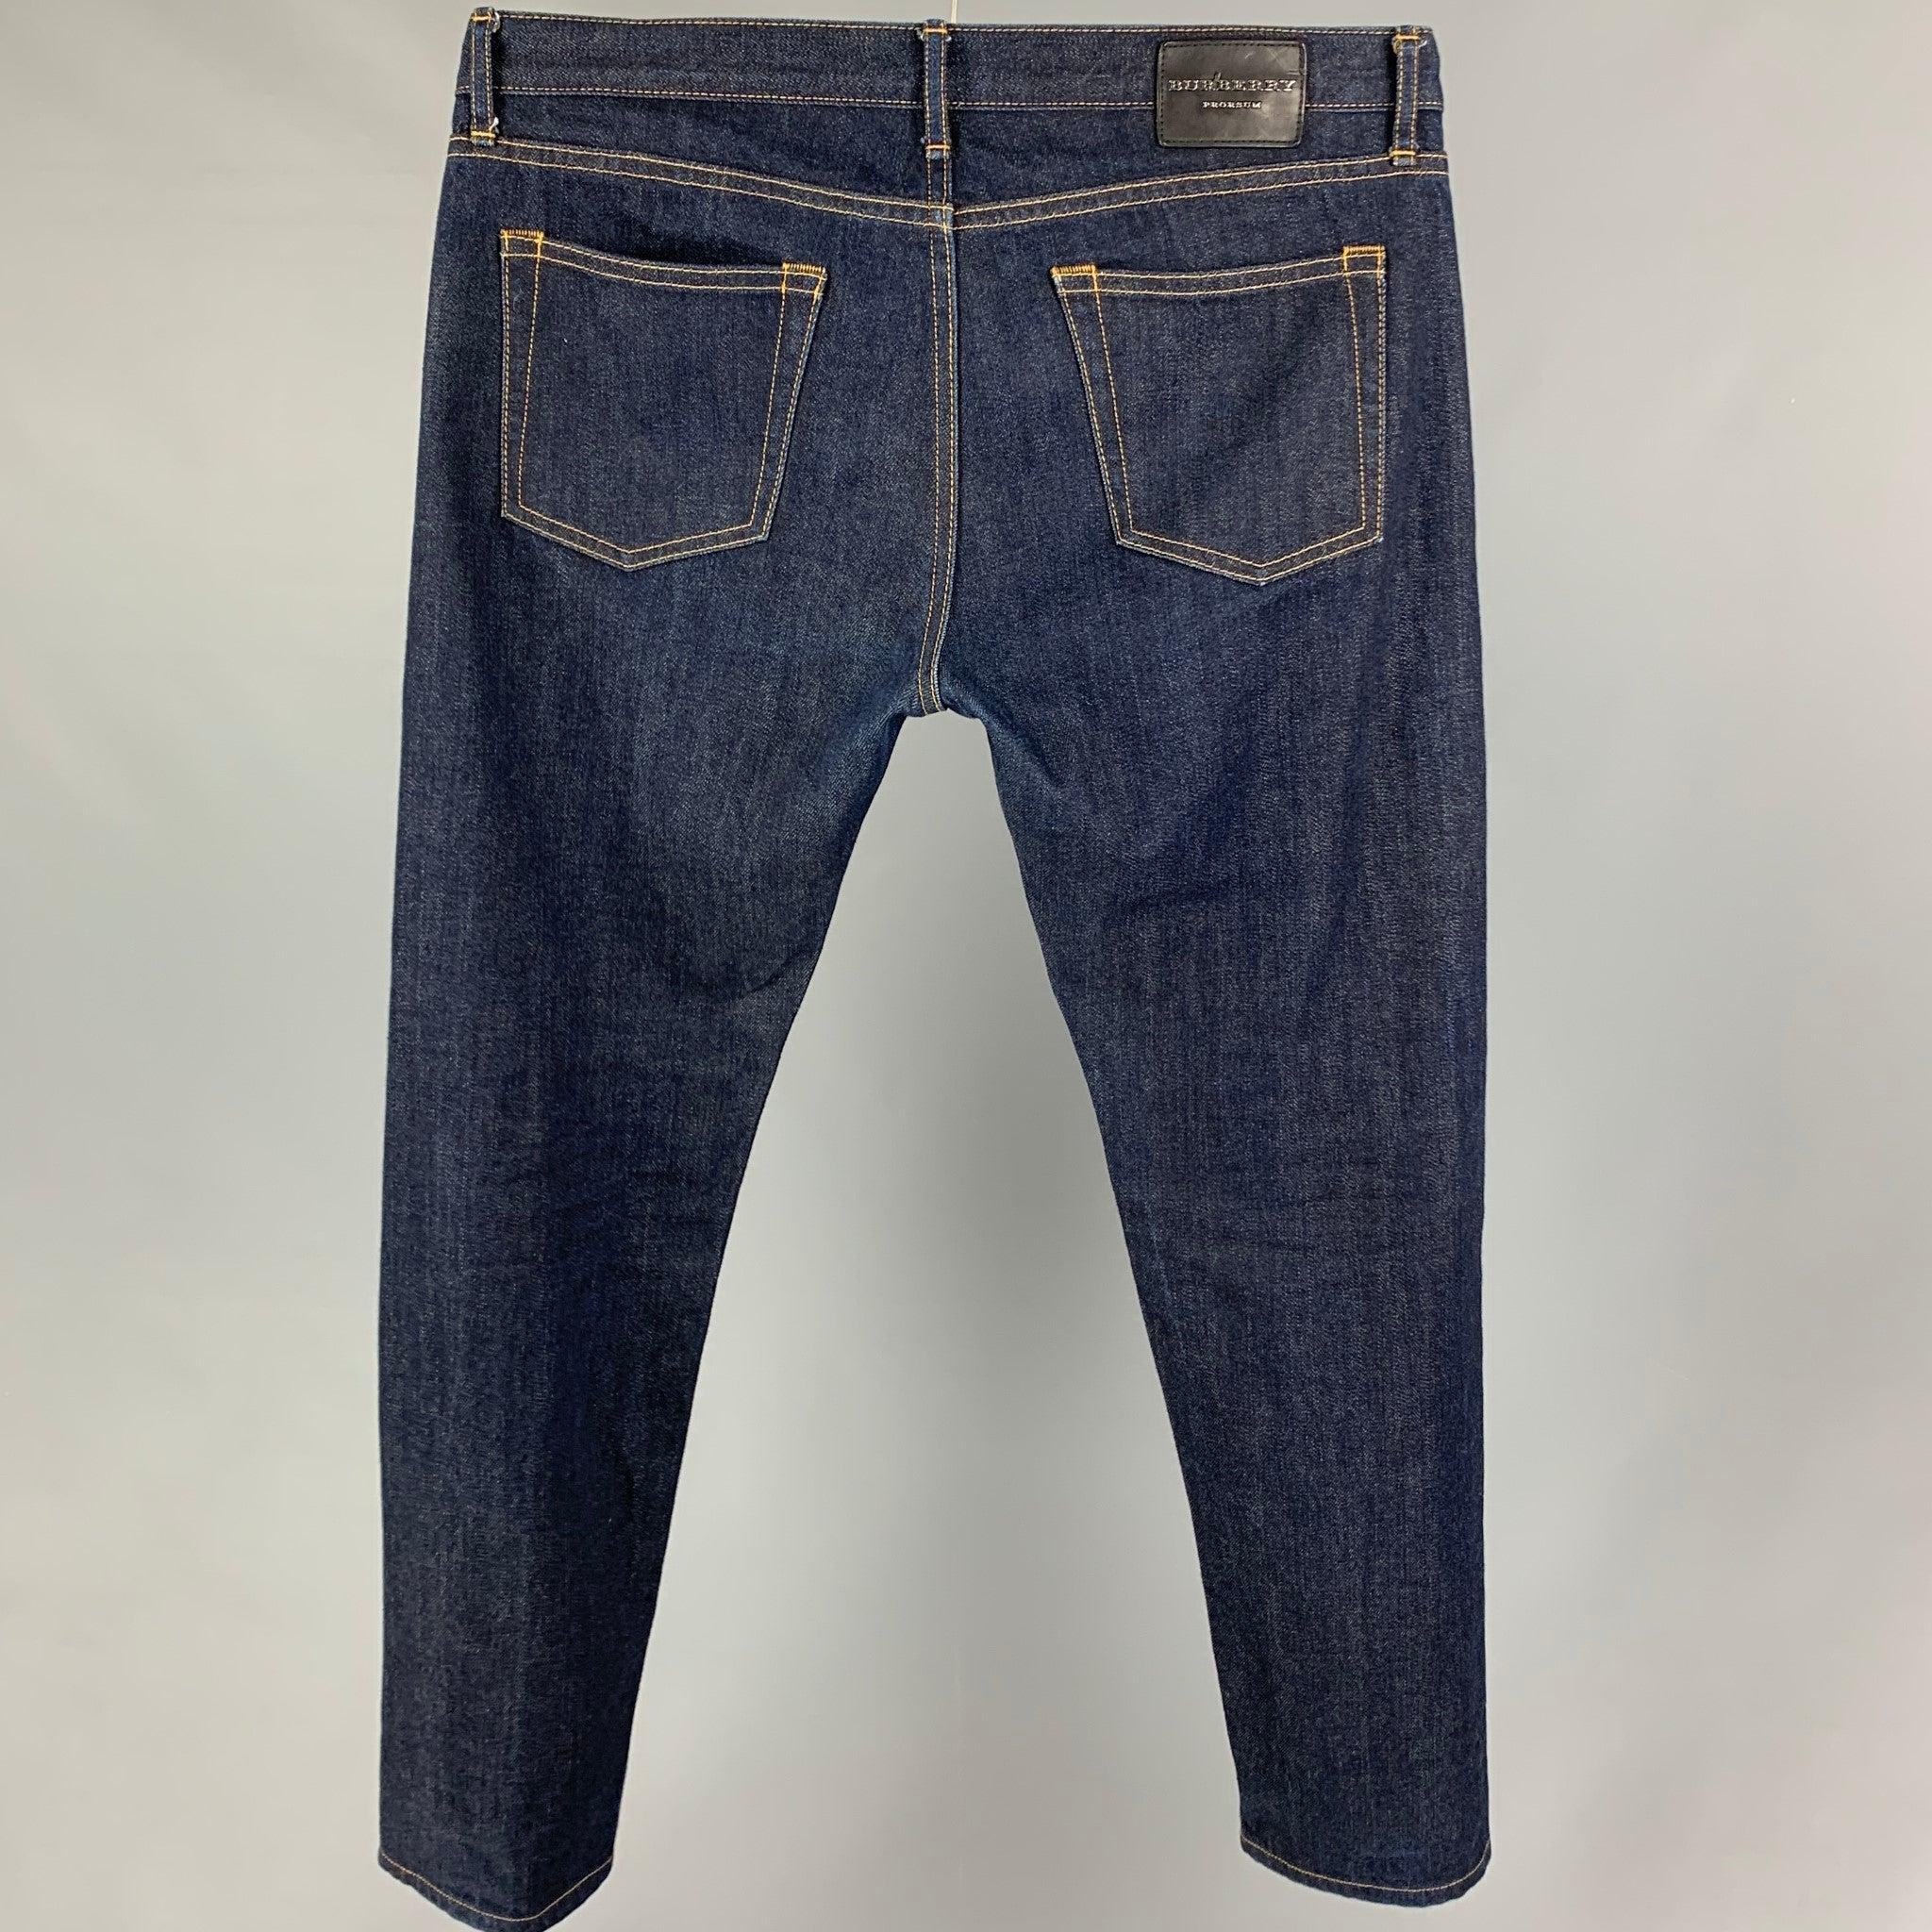 BURBERRY PRORSUM by Christopher Bailey jeans comes in a indigo blue denim featuring a slim fit, contrast stitching, and a button fly closure.
Very Good
Pre-Owned Condition. 

Marked:   32 

Measurements: 
  Waist: 32 inches Rise:
8.5 inches  Inseam: